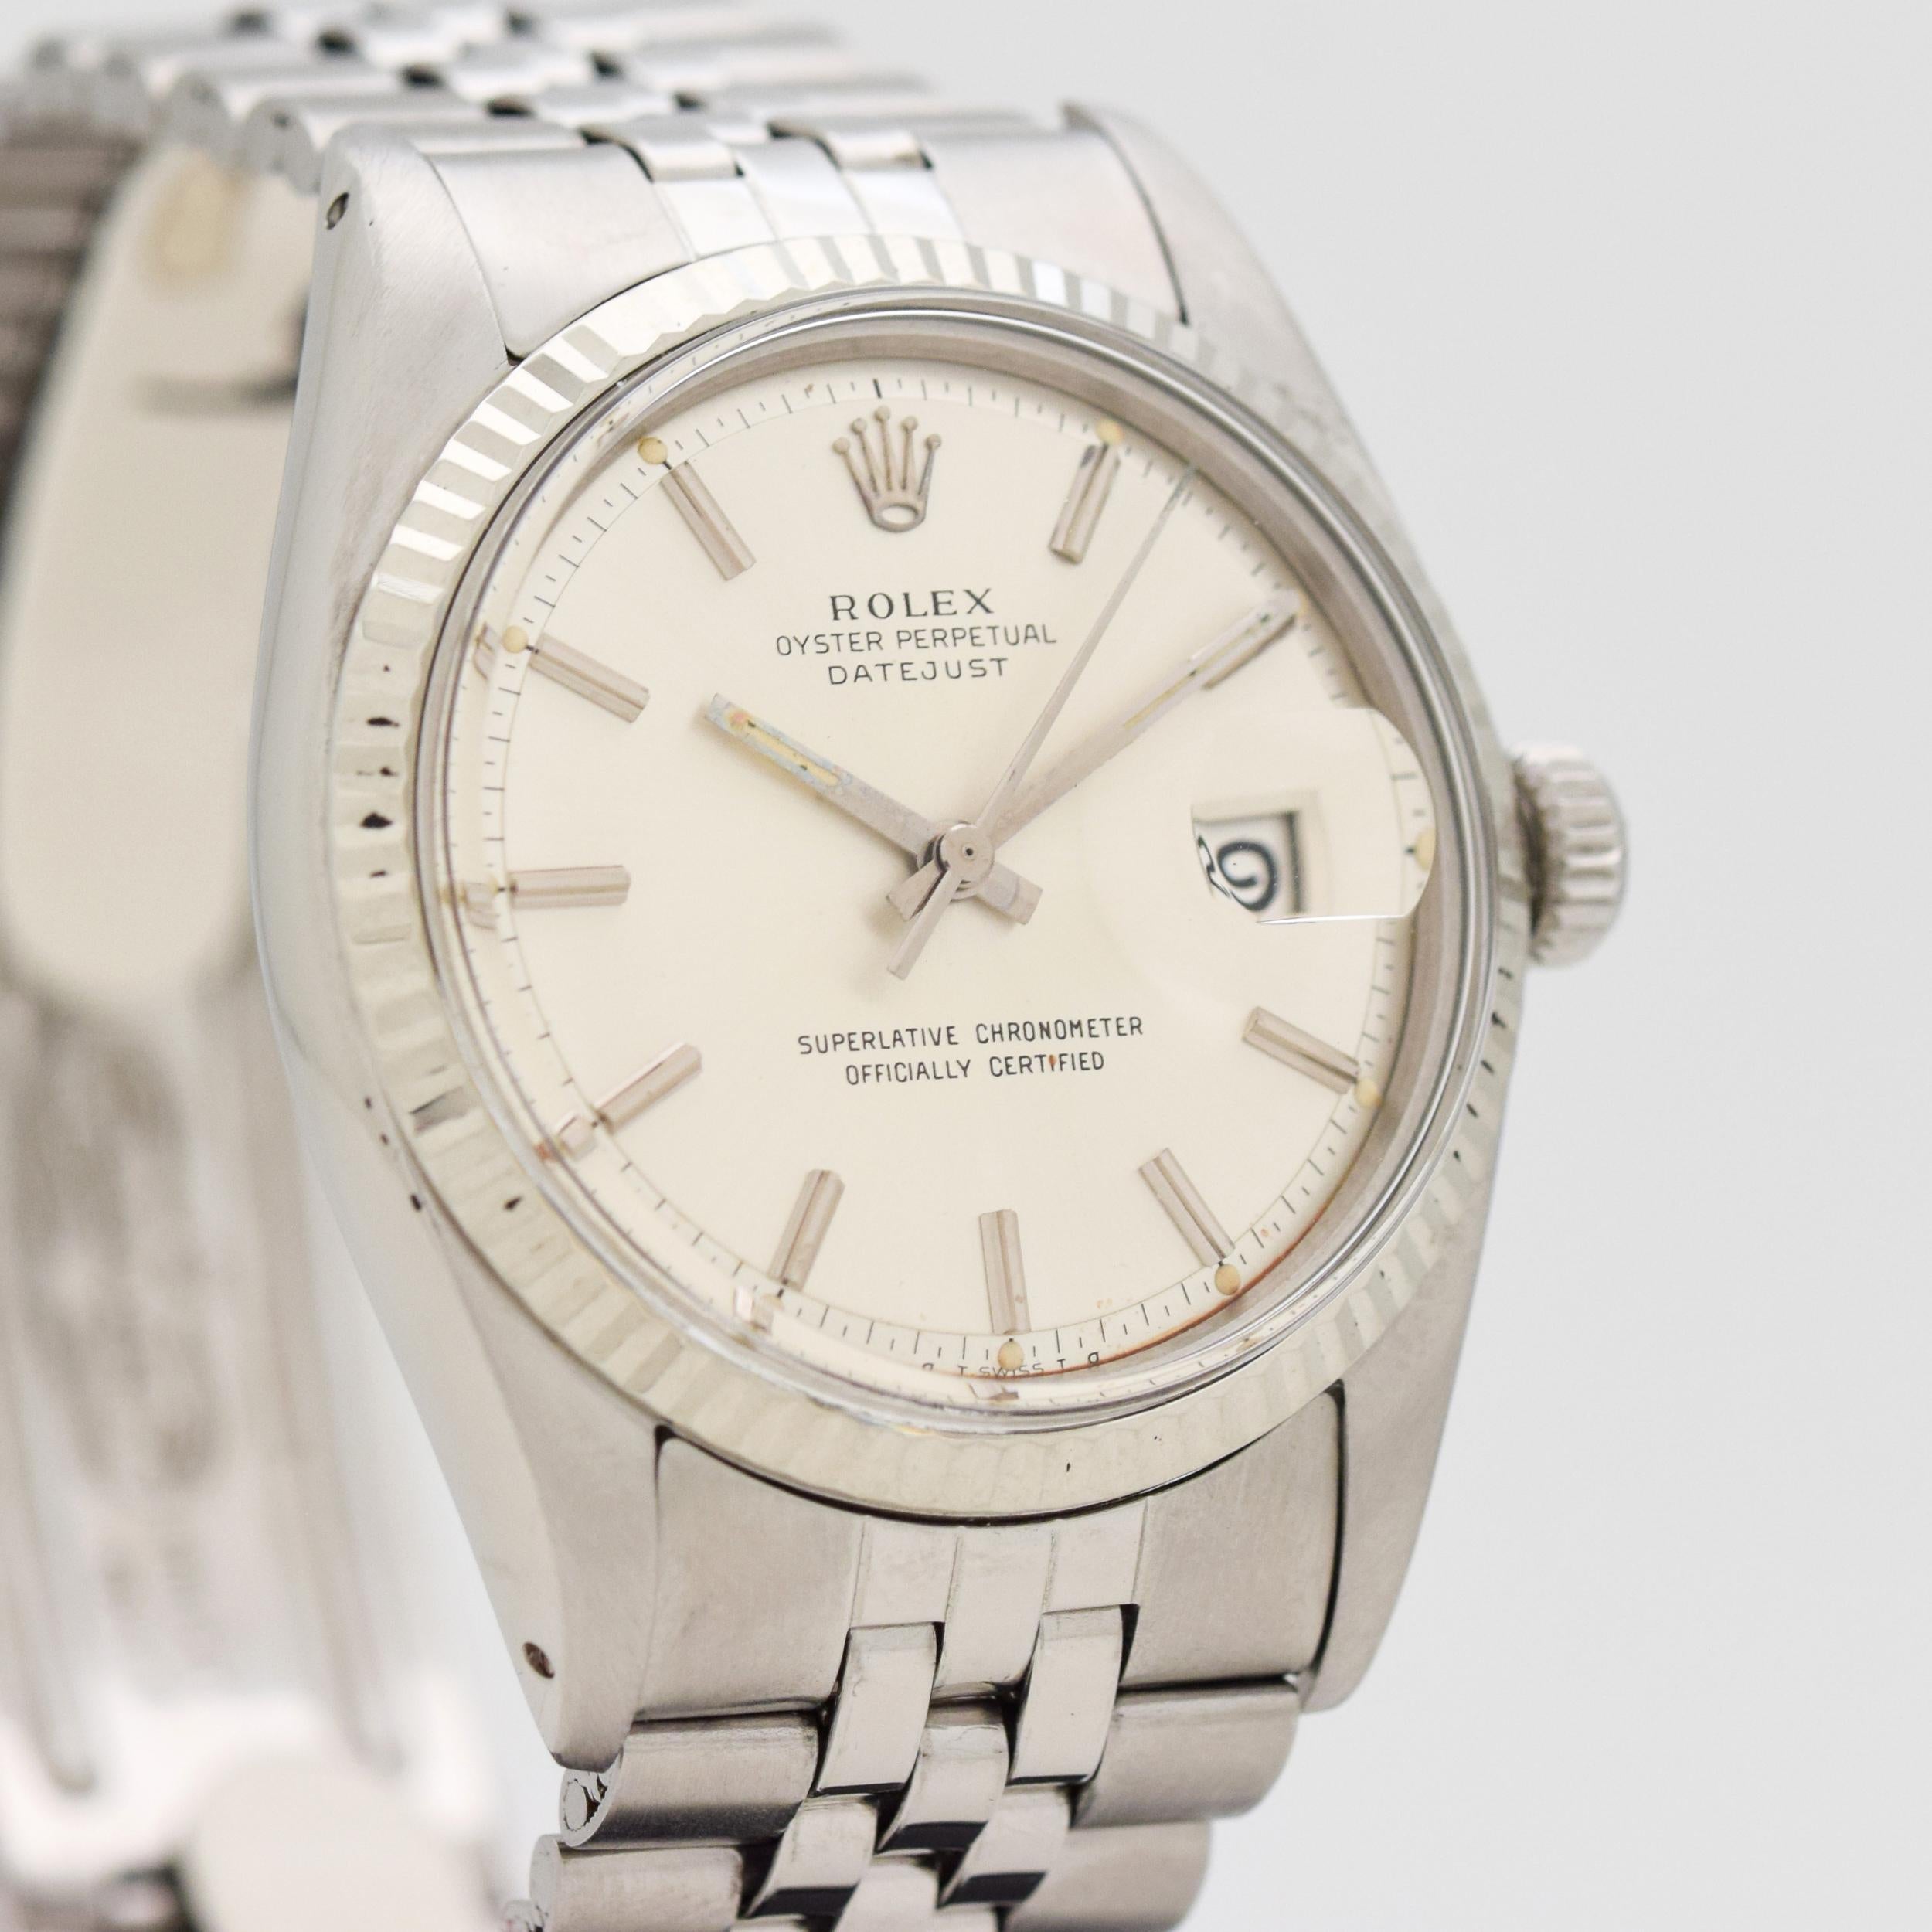 1973 Vintage Rolex Datejust Reference 1601. 14K White Gold & Stainless Steel case. Silver dial with applied, baton markers. OT Swiss TO dial. Powered by a 26-jewel, automatic caliber movement. Equipped with an original, Rolex Stainless Steel Jubilee